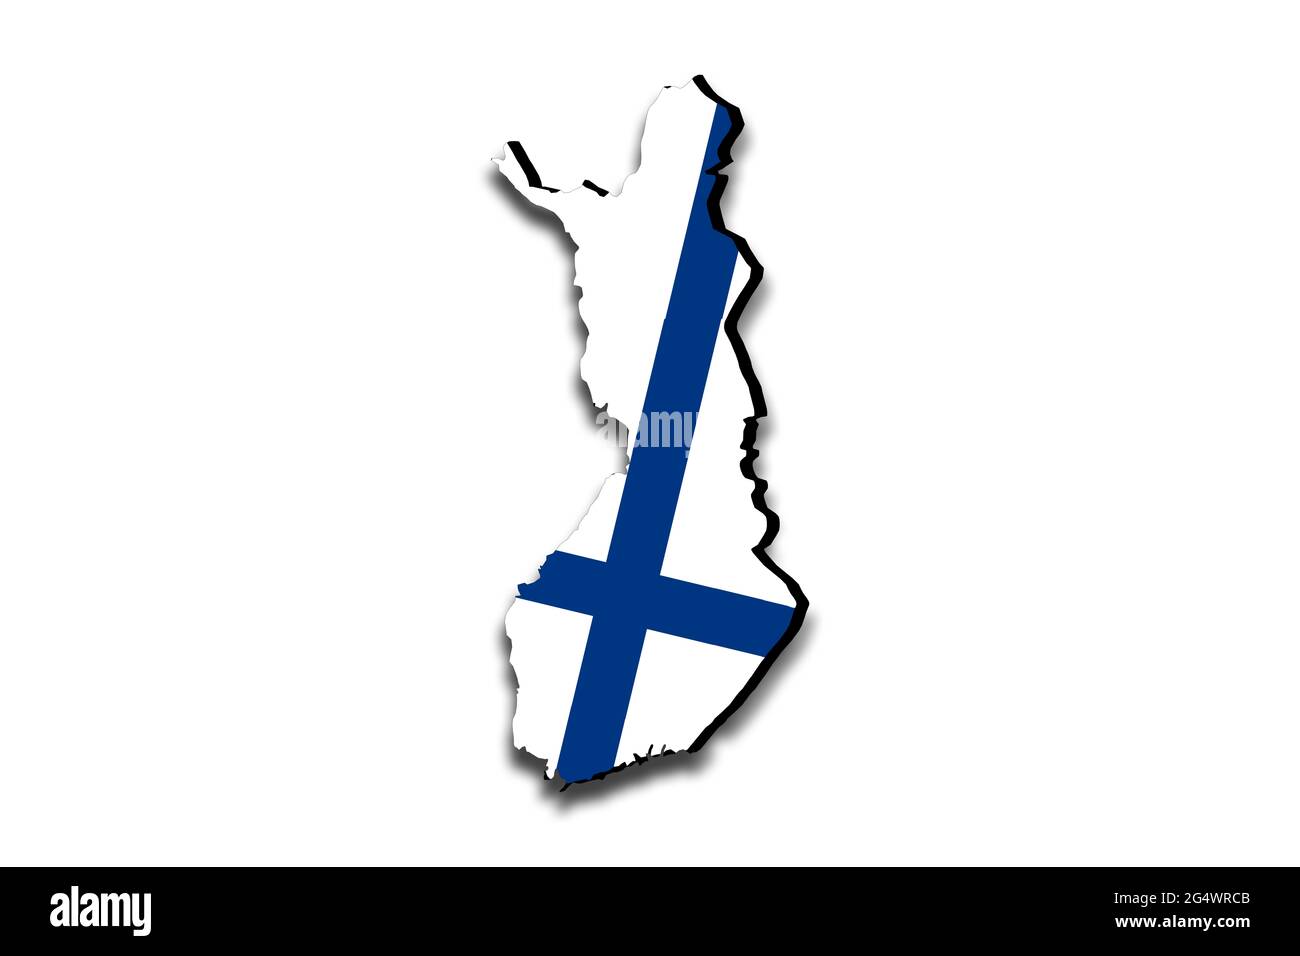 Outline map of Finland with the national flag superimposed over the country. 3D graphics casting a shadow on the white background Stock Photo